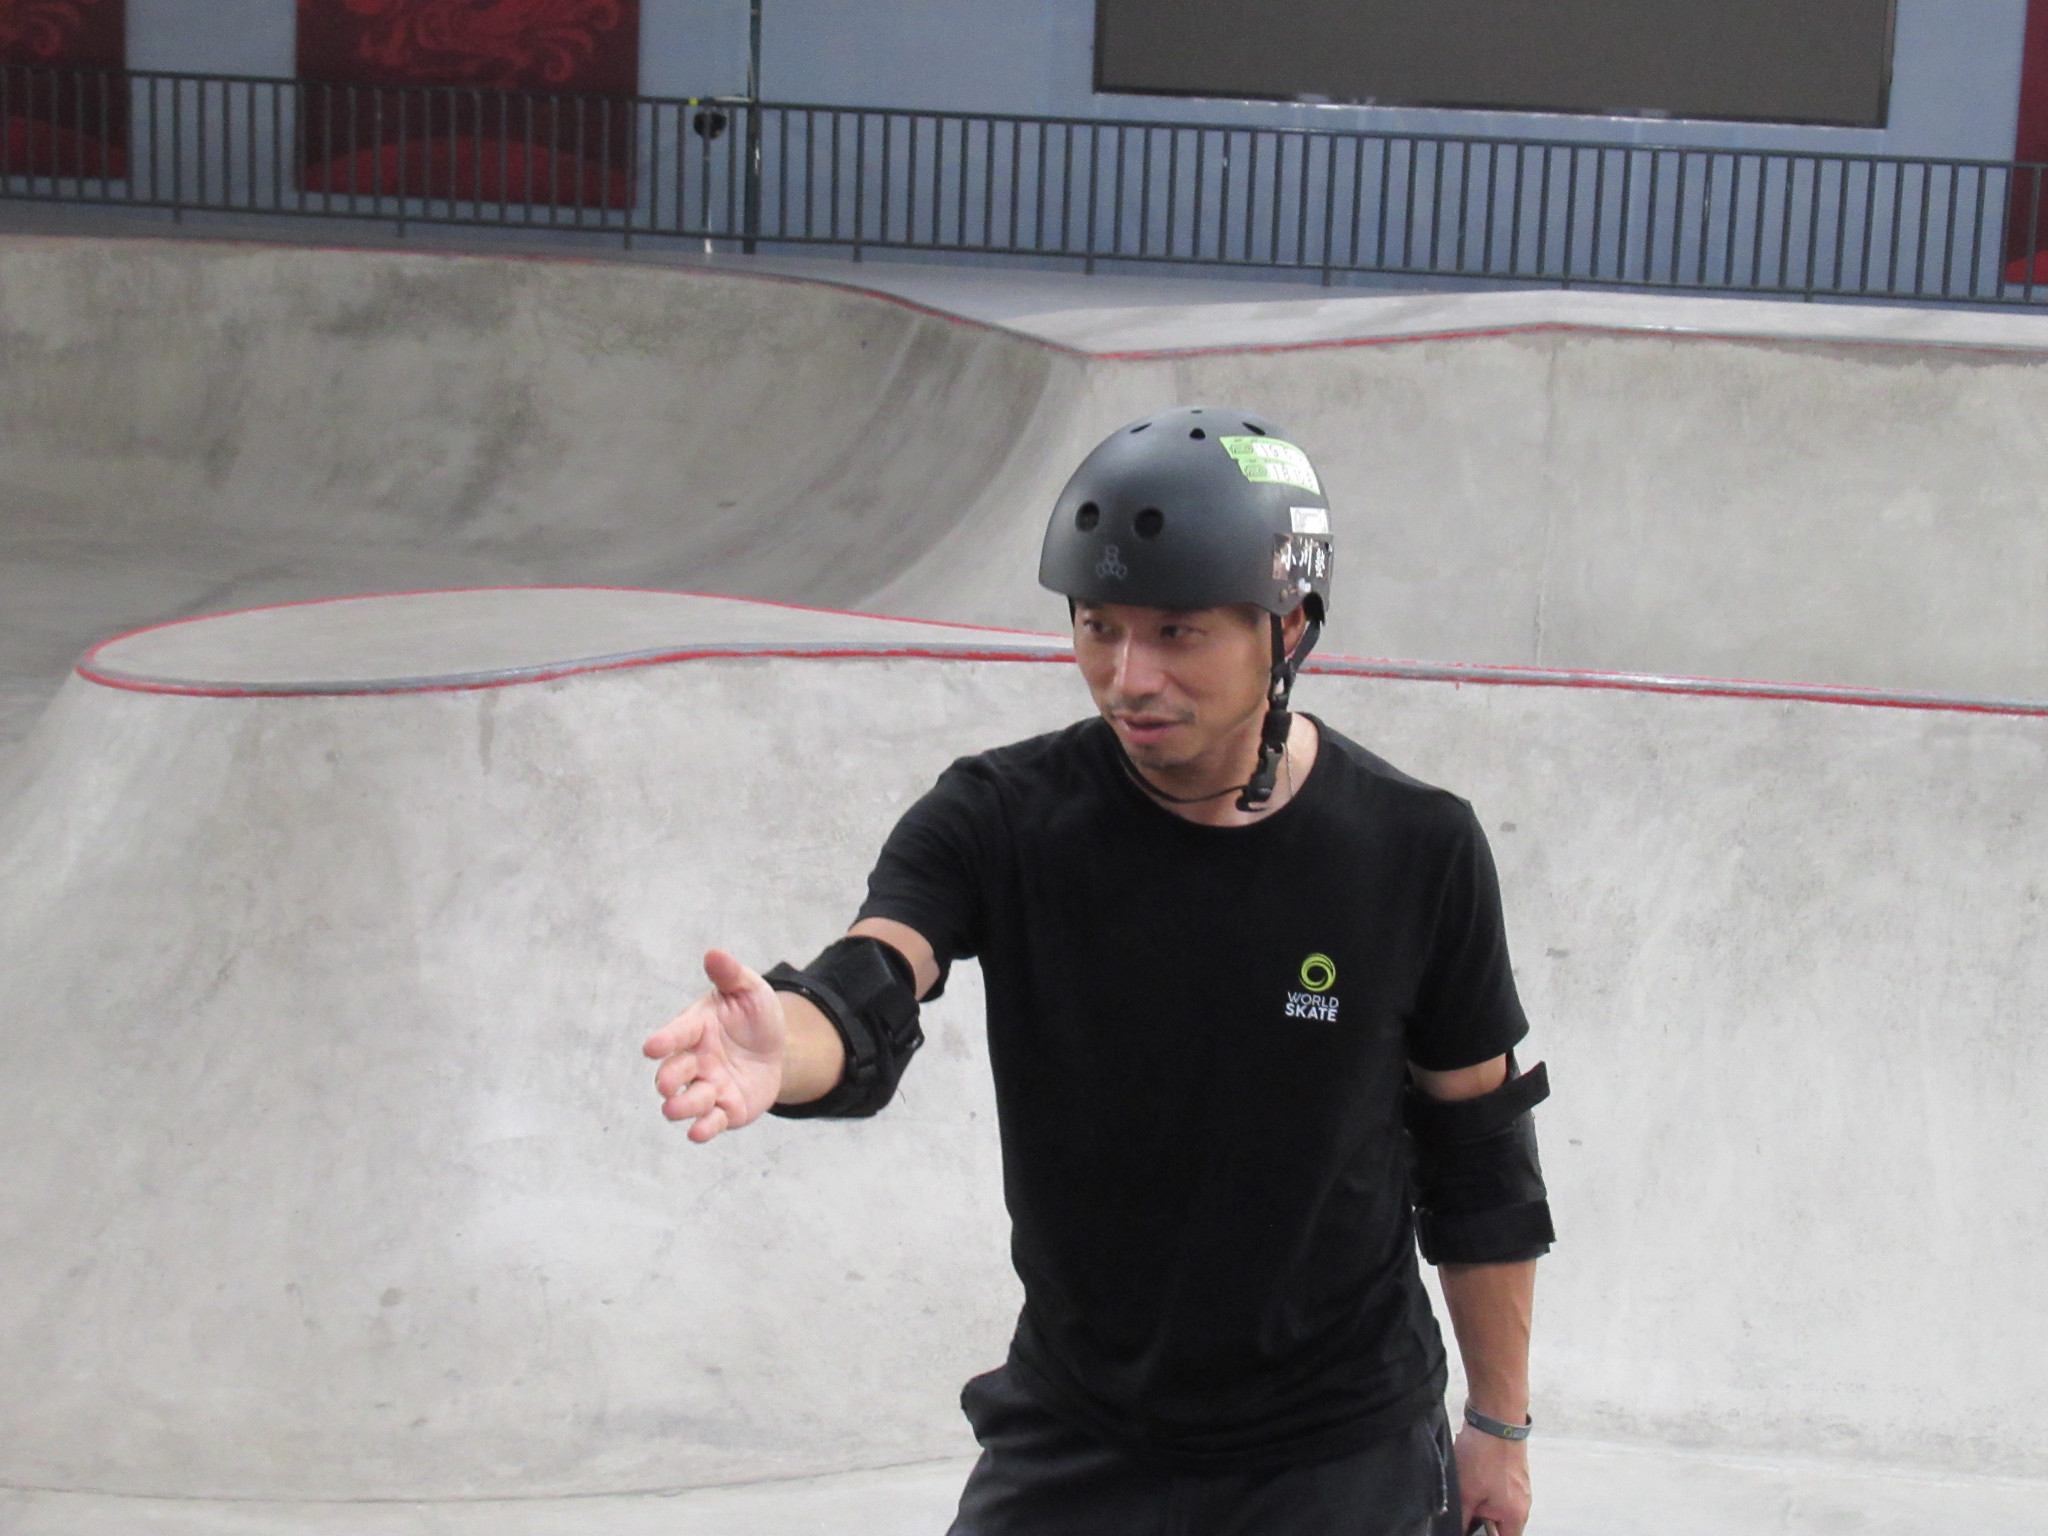 OCA skateboarding youth camp "featured potential 2024 Olympians"